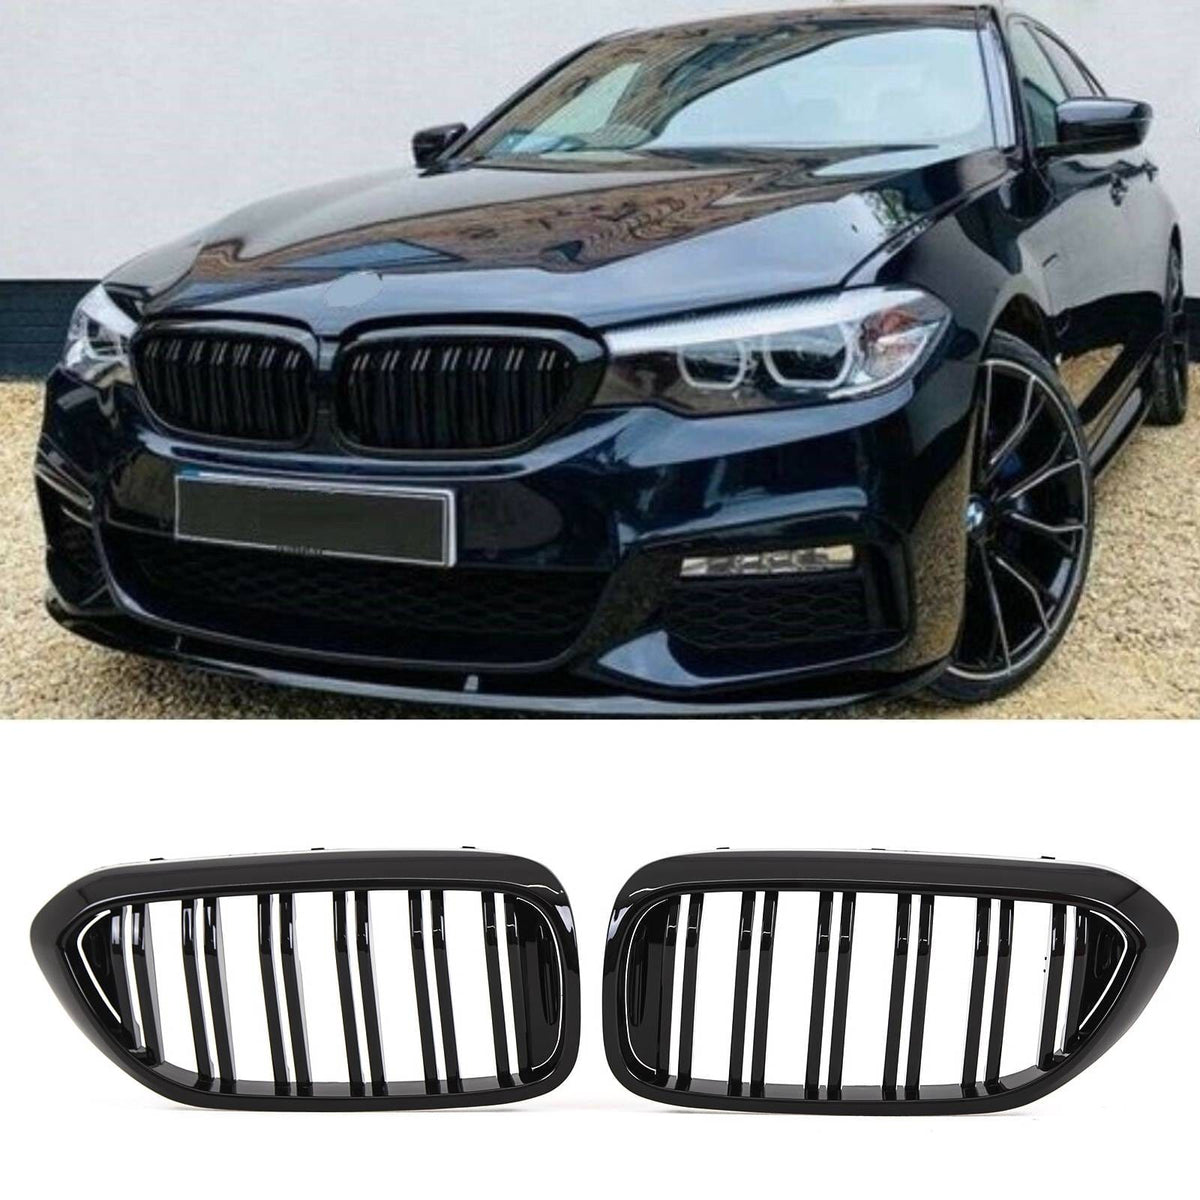 BMW M Performance Black Kidney Grille for 5 Series